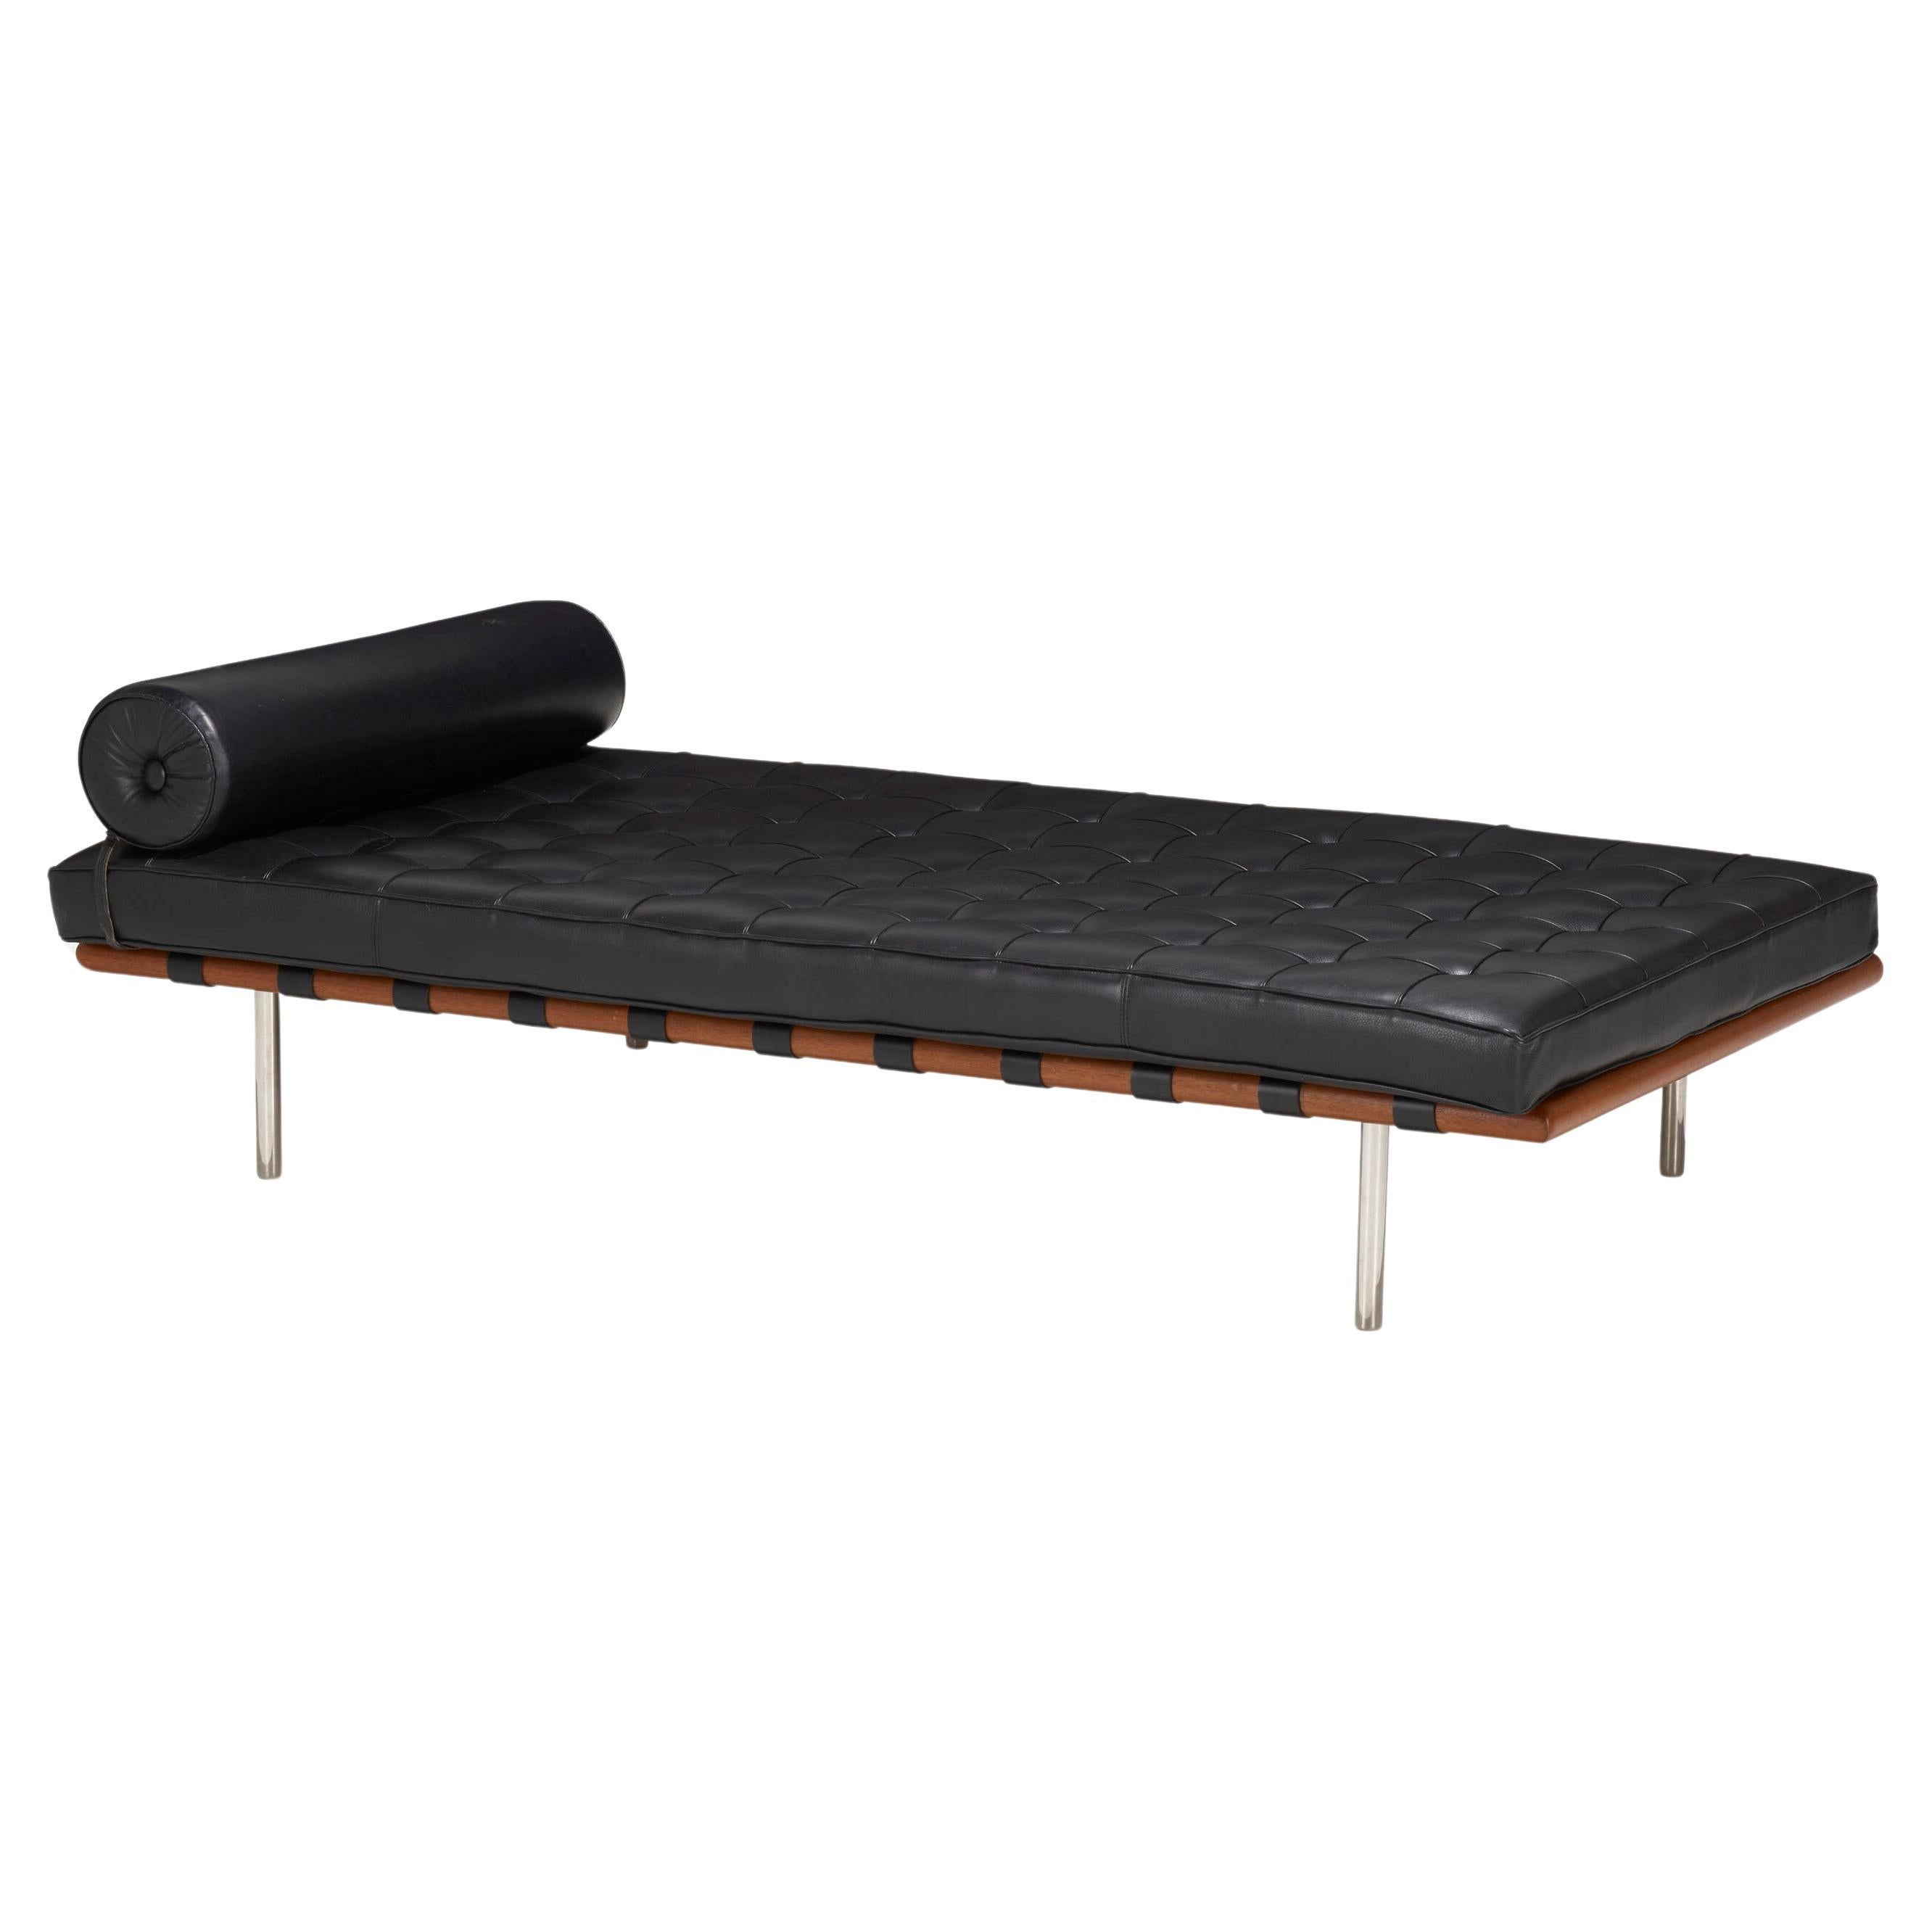 Ludwig Mies van der Rohe Barcelona daybed